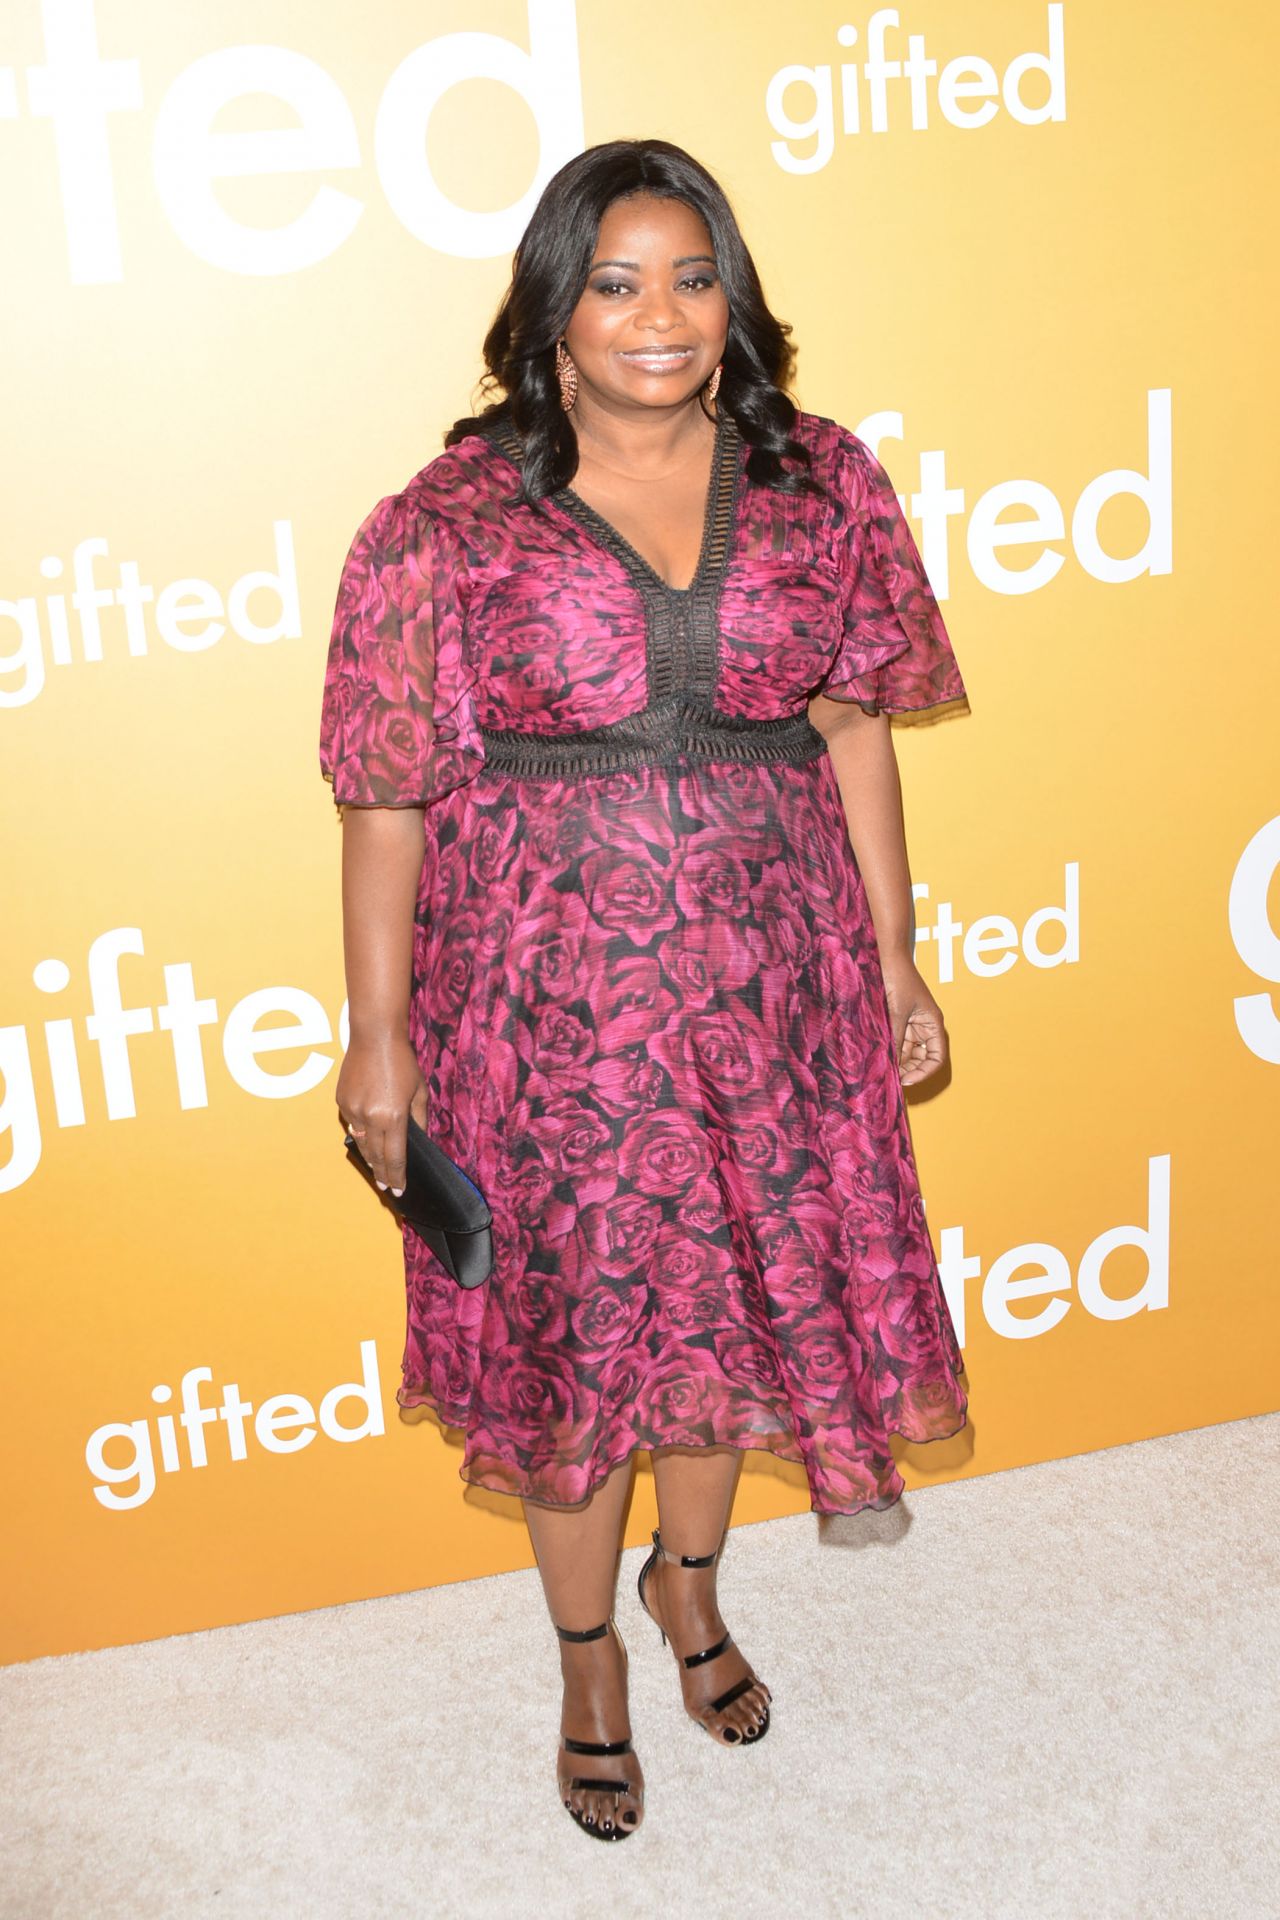 Octavia Spencer – “Gifted” Premiere in Los Anegeles 4/4/2017 • CelebMafia